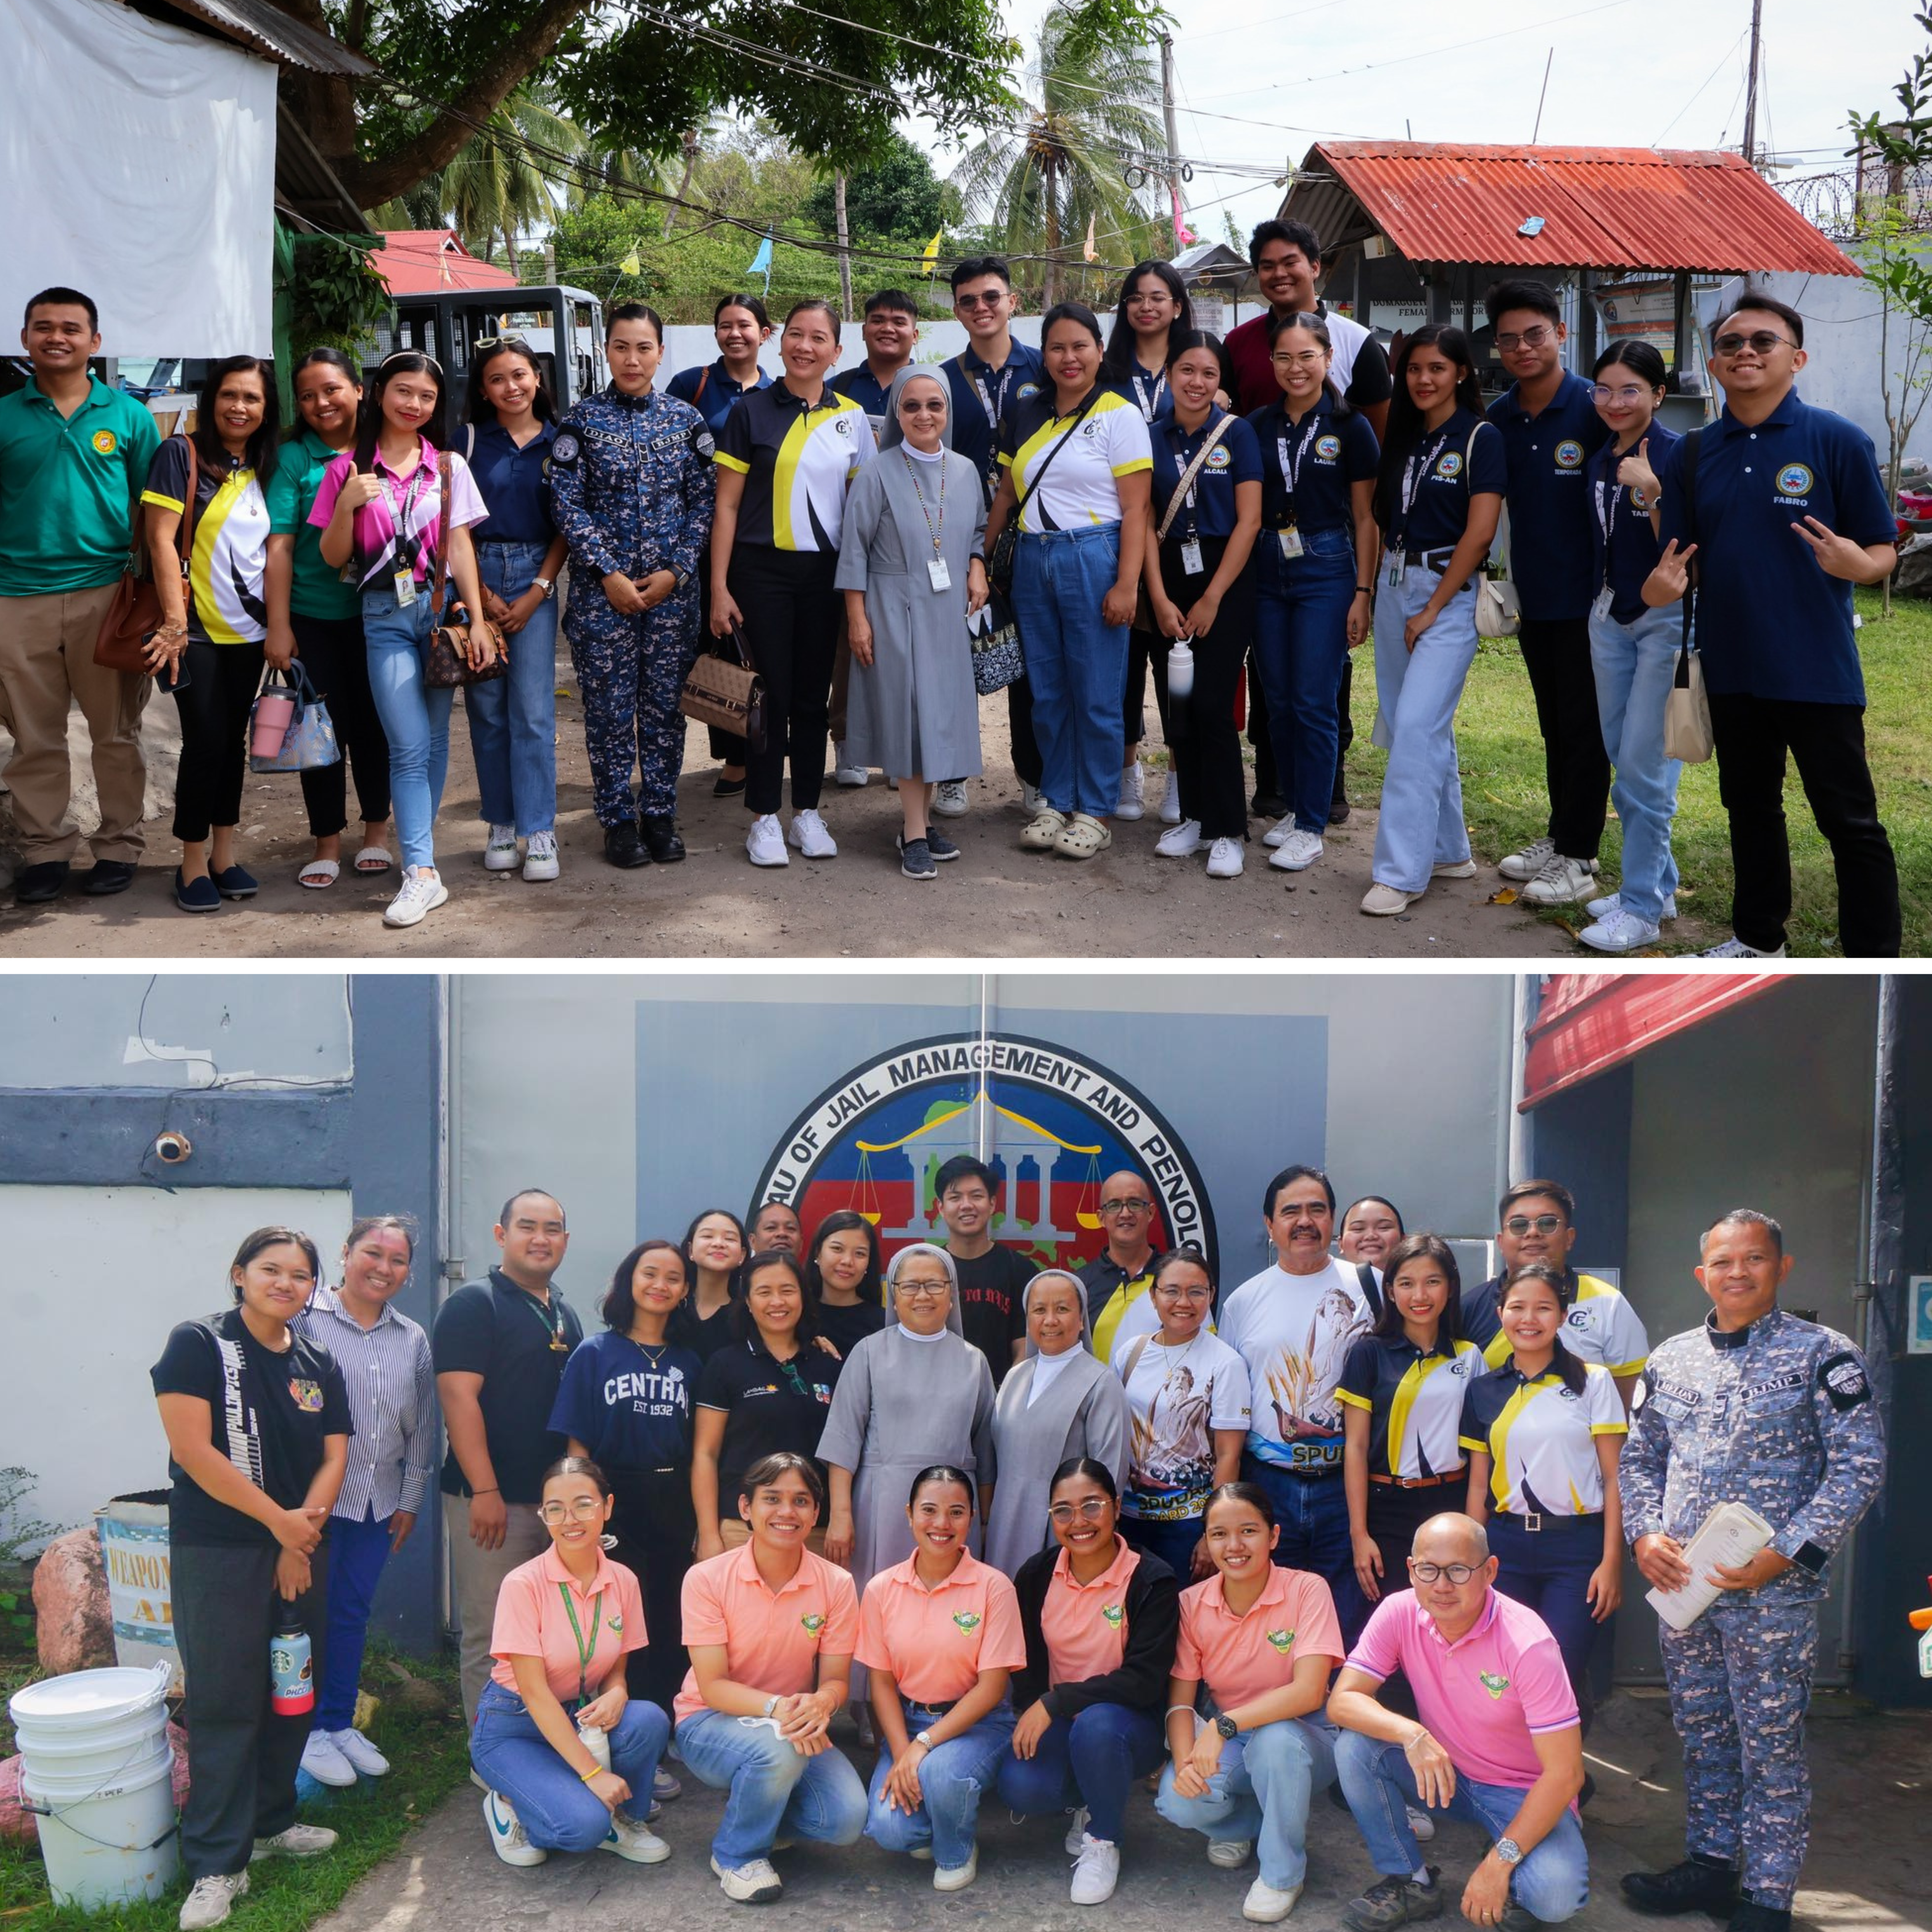 Dumaguete City – SPU Dumaguete (SPUD) carried out its annual Prison Ministry on January 28 at the City and Provincial Jail in honor of the Feast of the Conversion of St. Paul.